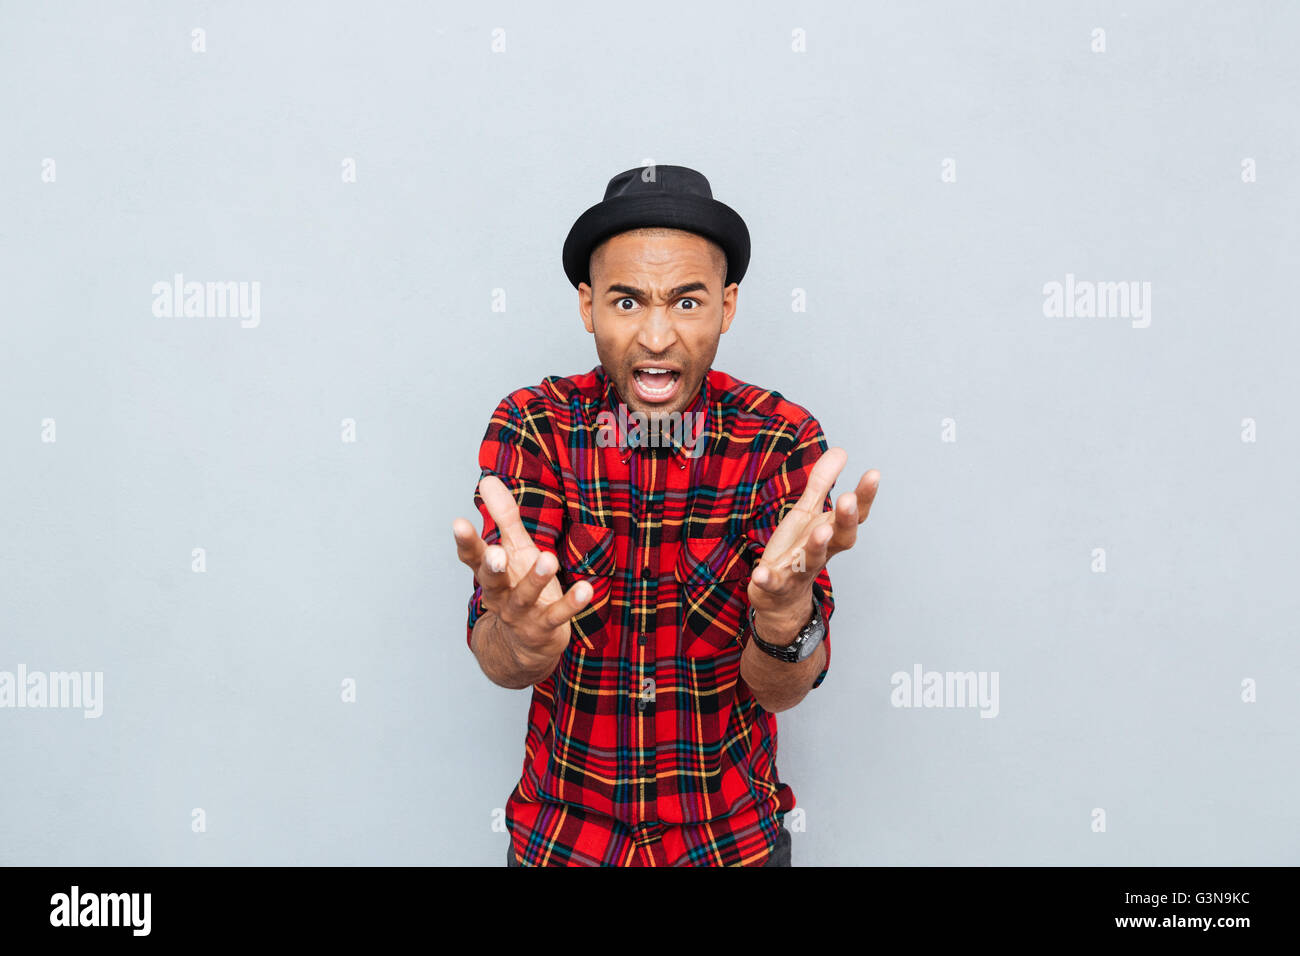 Angry mad african man in plaid shirt standing and shouting Stock Photo